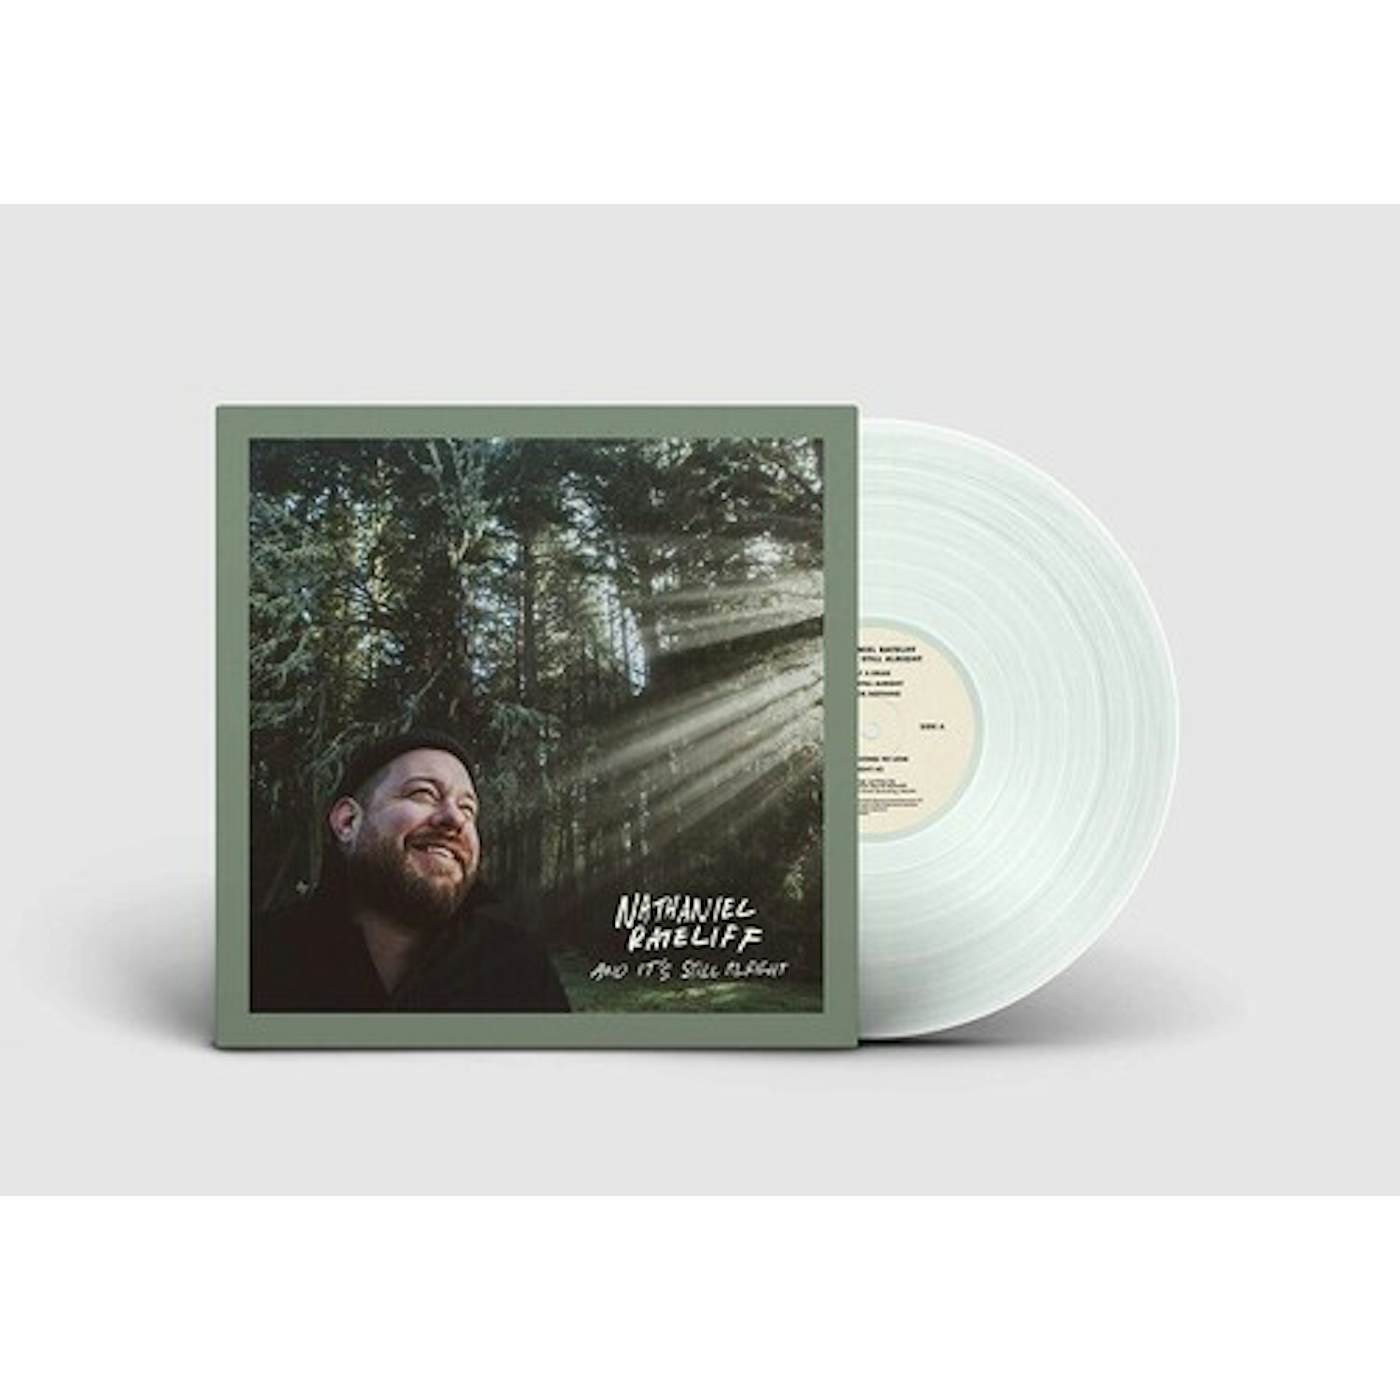 Nathaniel Rateliff And It's Still Alright Vinyl Record